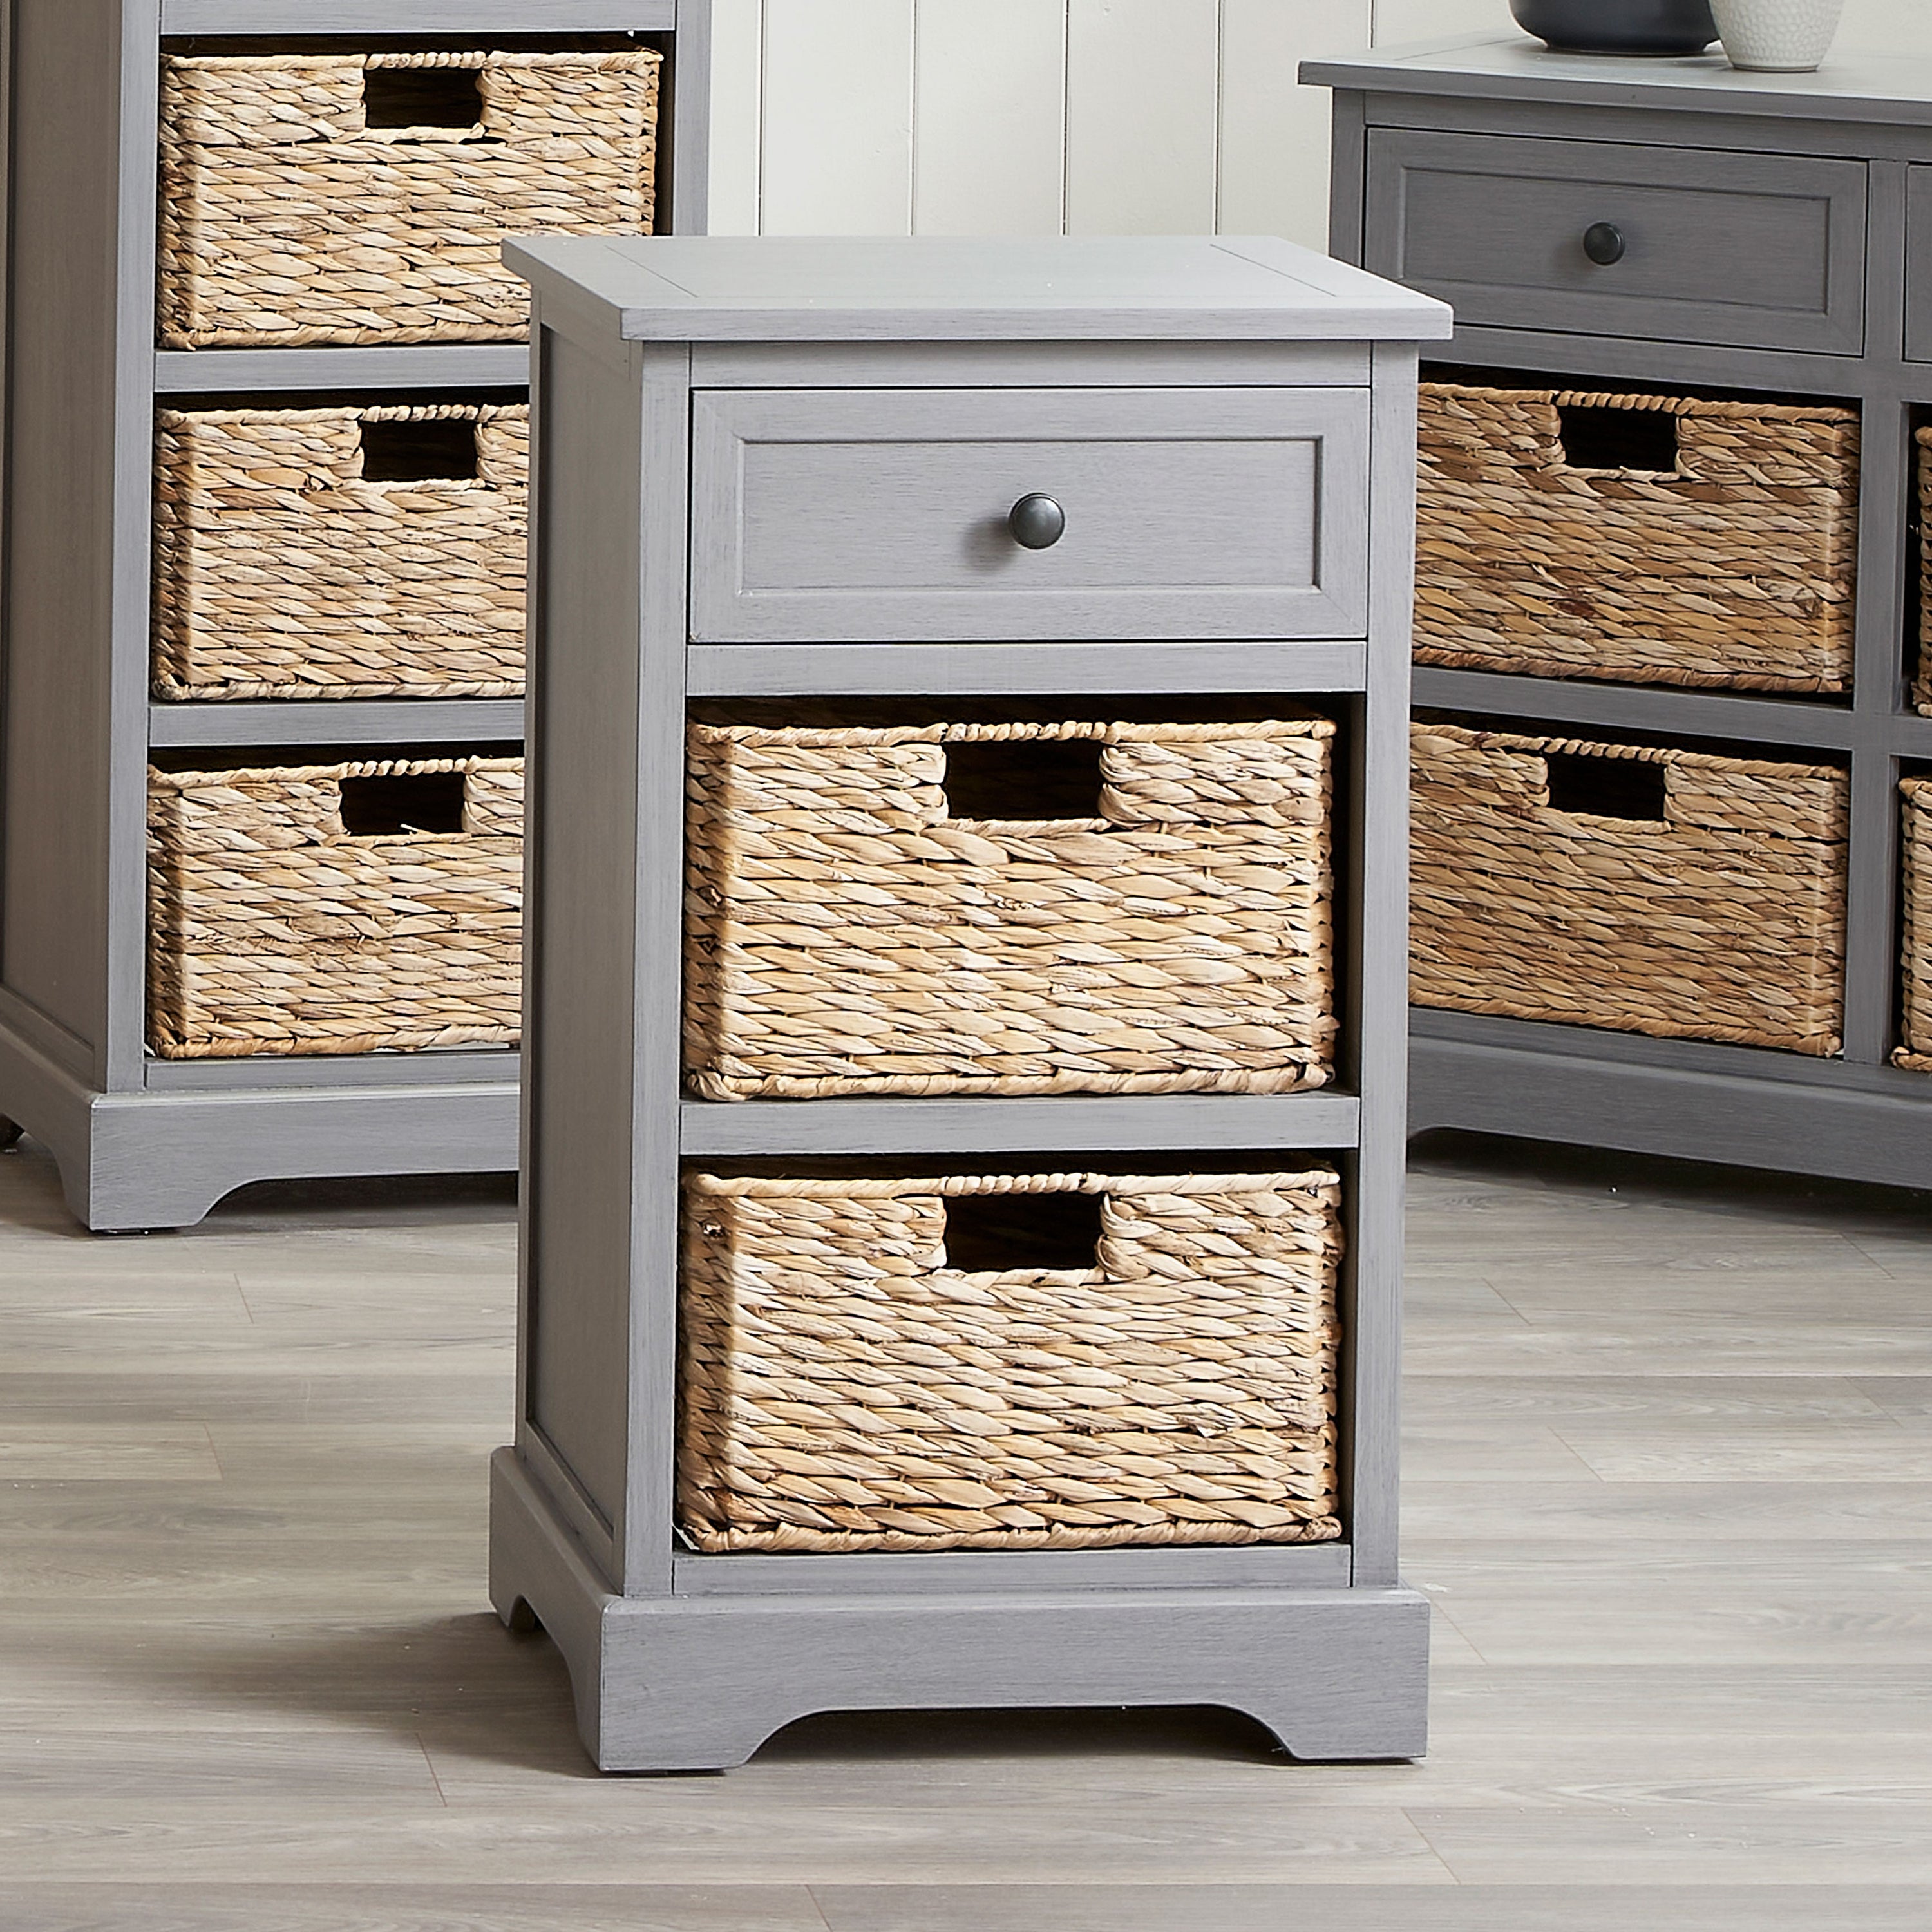 Pacific Devonshire 3 Drawer Slim Bedside Table, Grey Painted Pine Grey